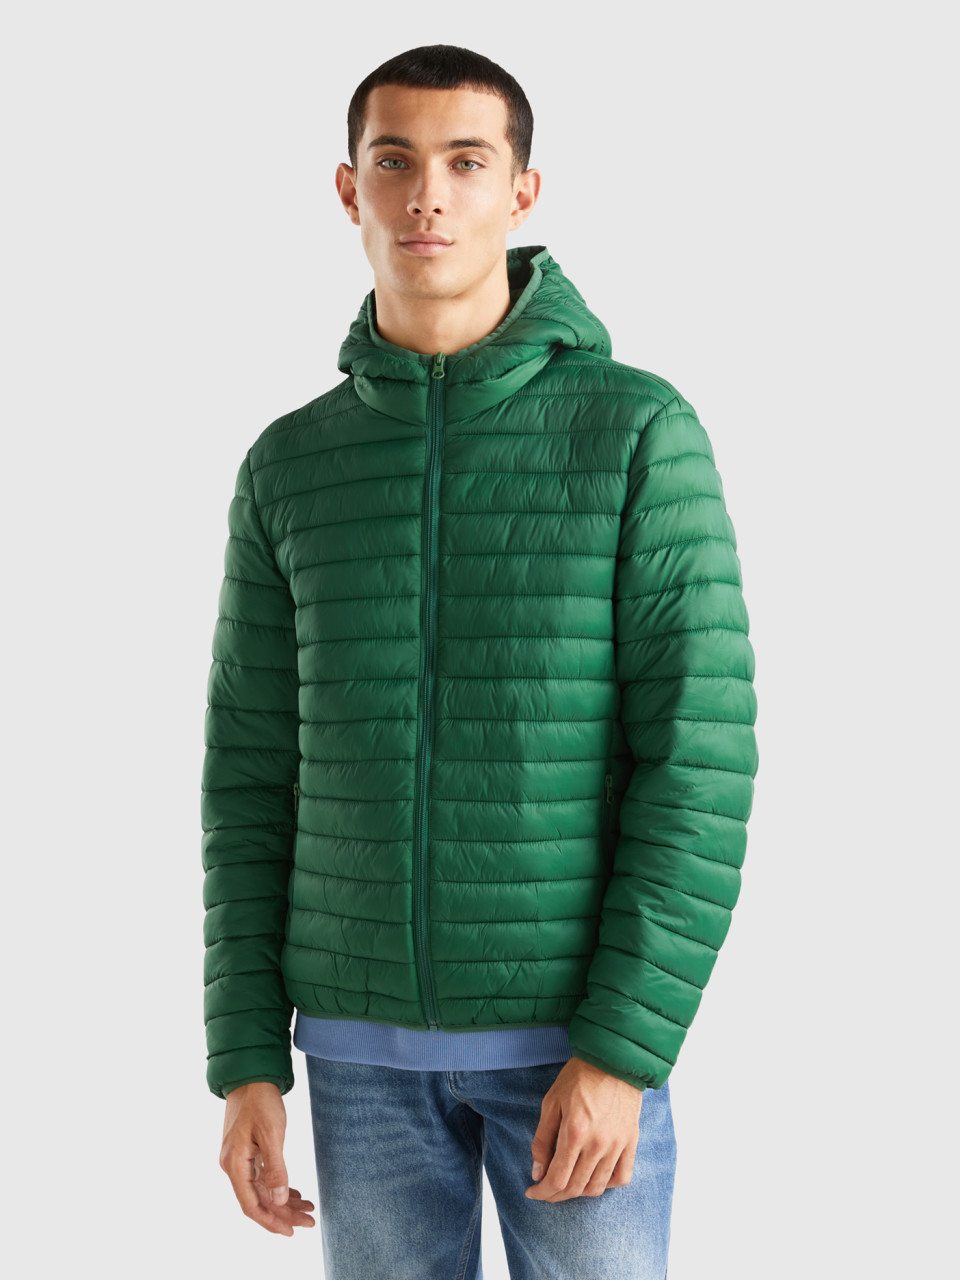 Benetton, Padded Jacket With Recycled Wadding, Dark Green, Men